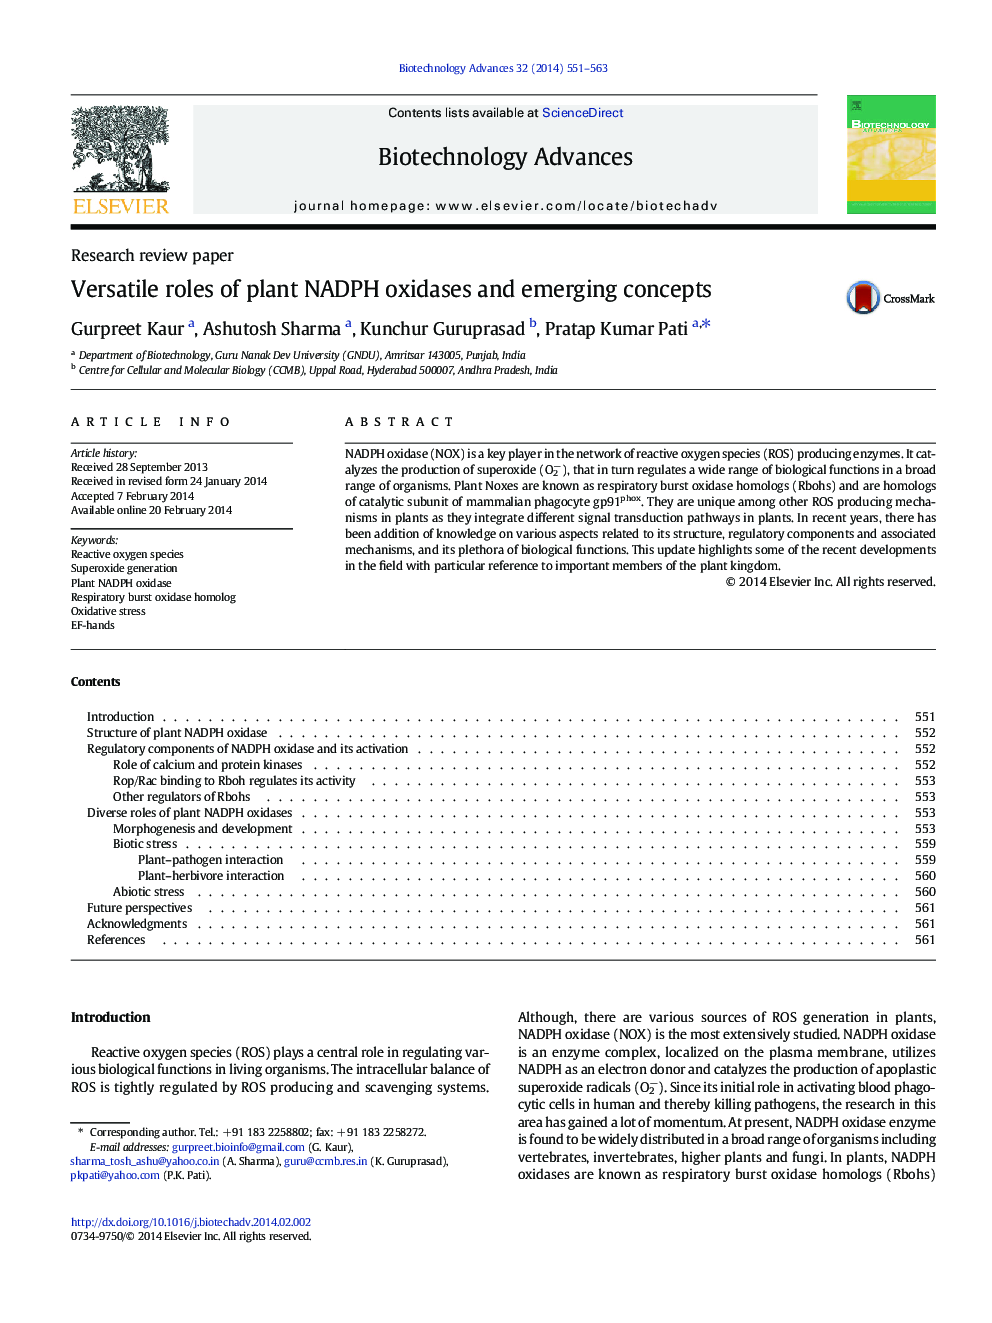 Versatile roles of plant NADPH oxidases and emerging concepts